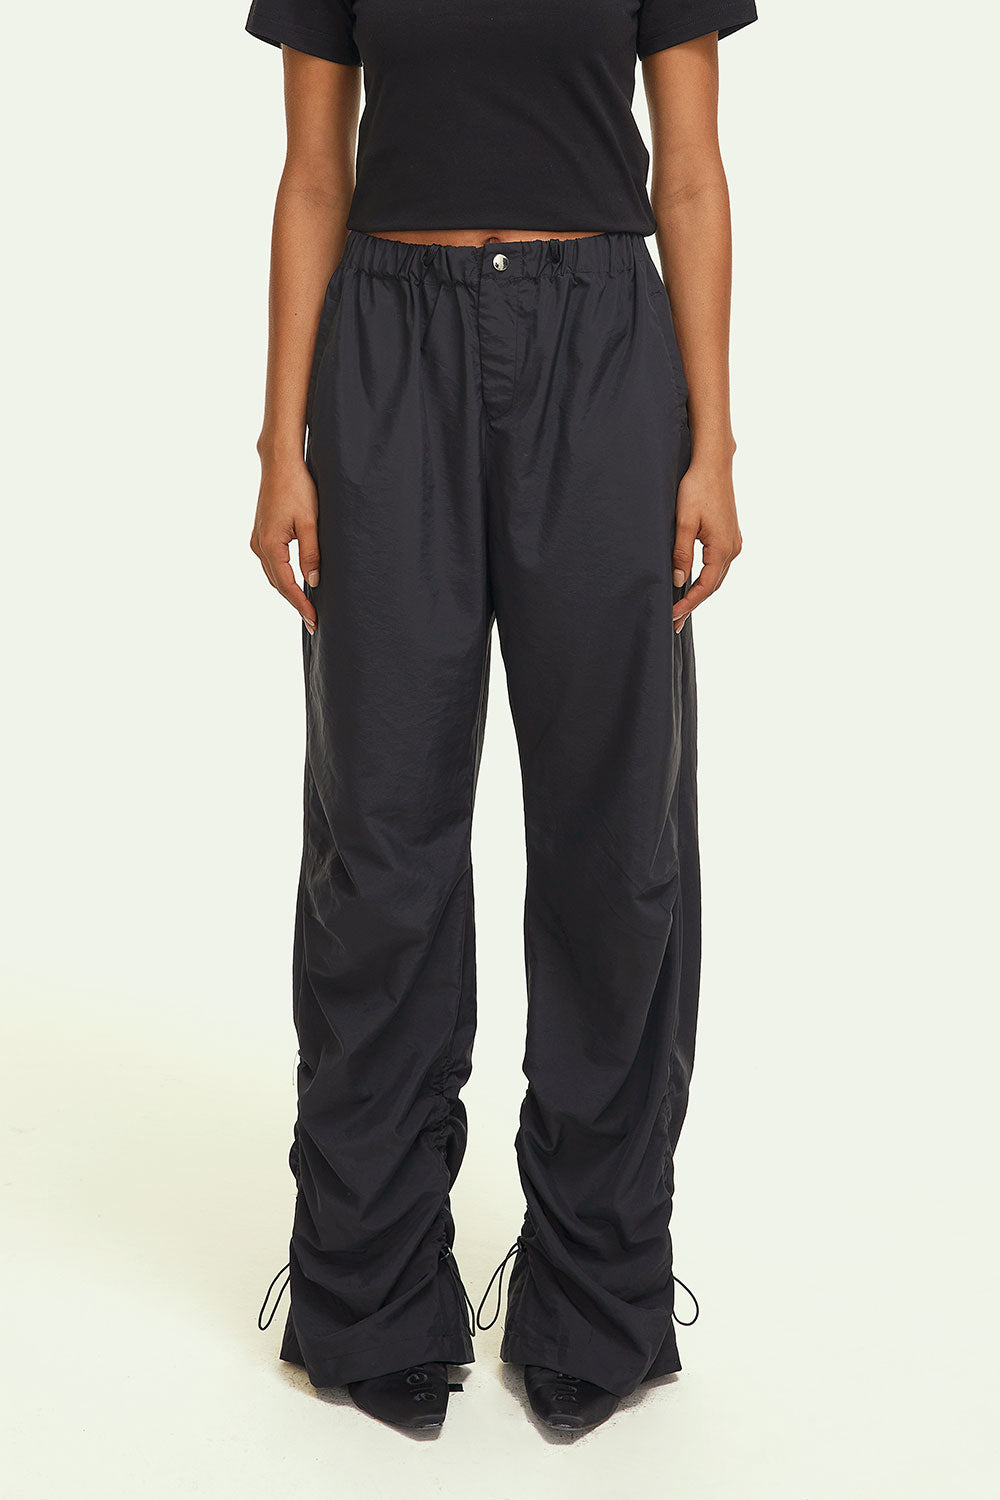 YPL Ruched Soft Pants